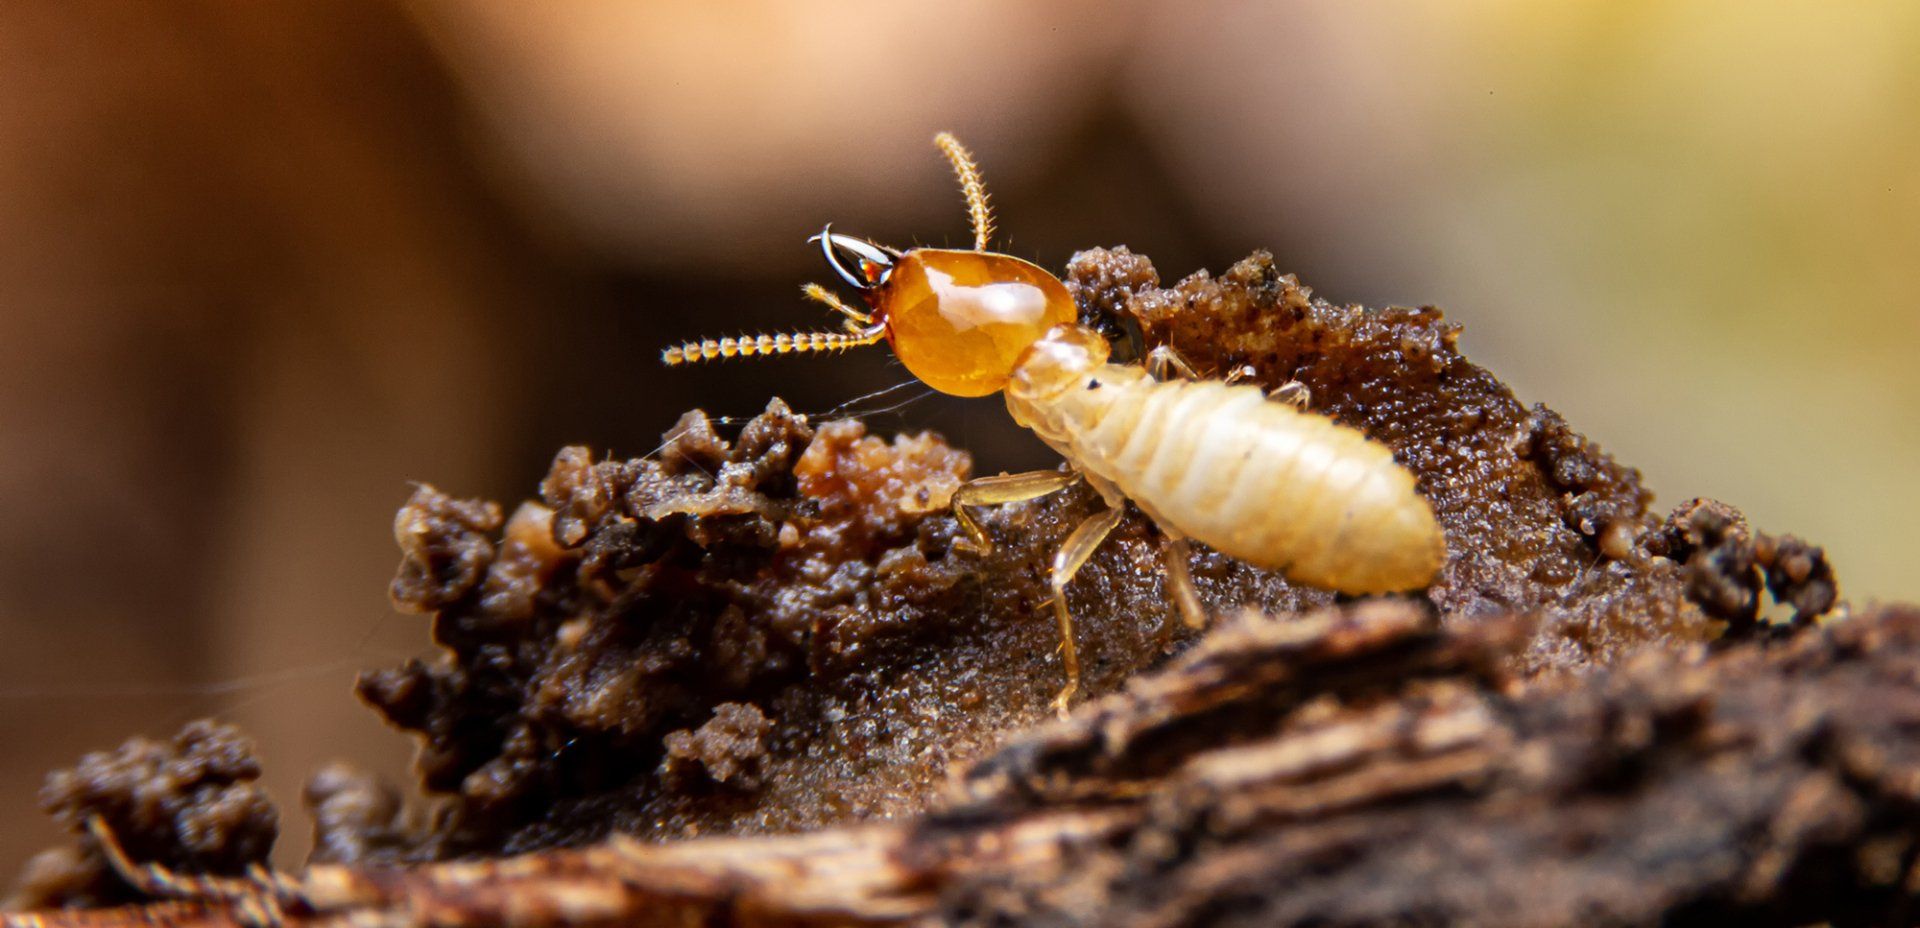 Call Steve's Pest Control for Termite Treatment in Mid-Missouri